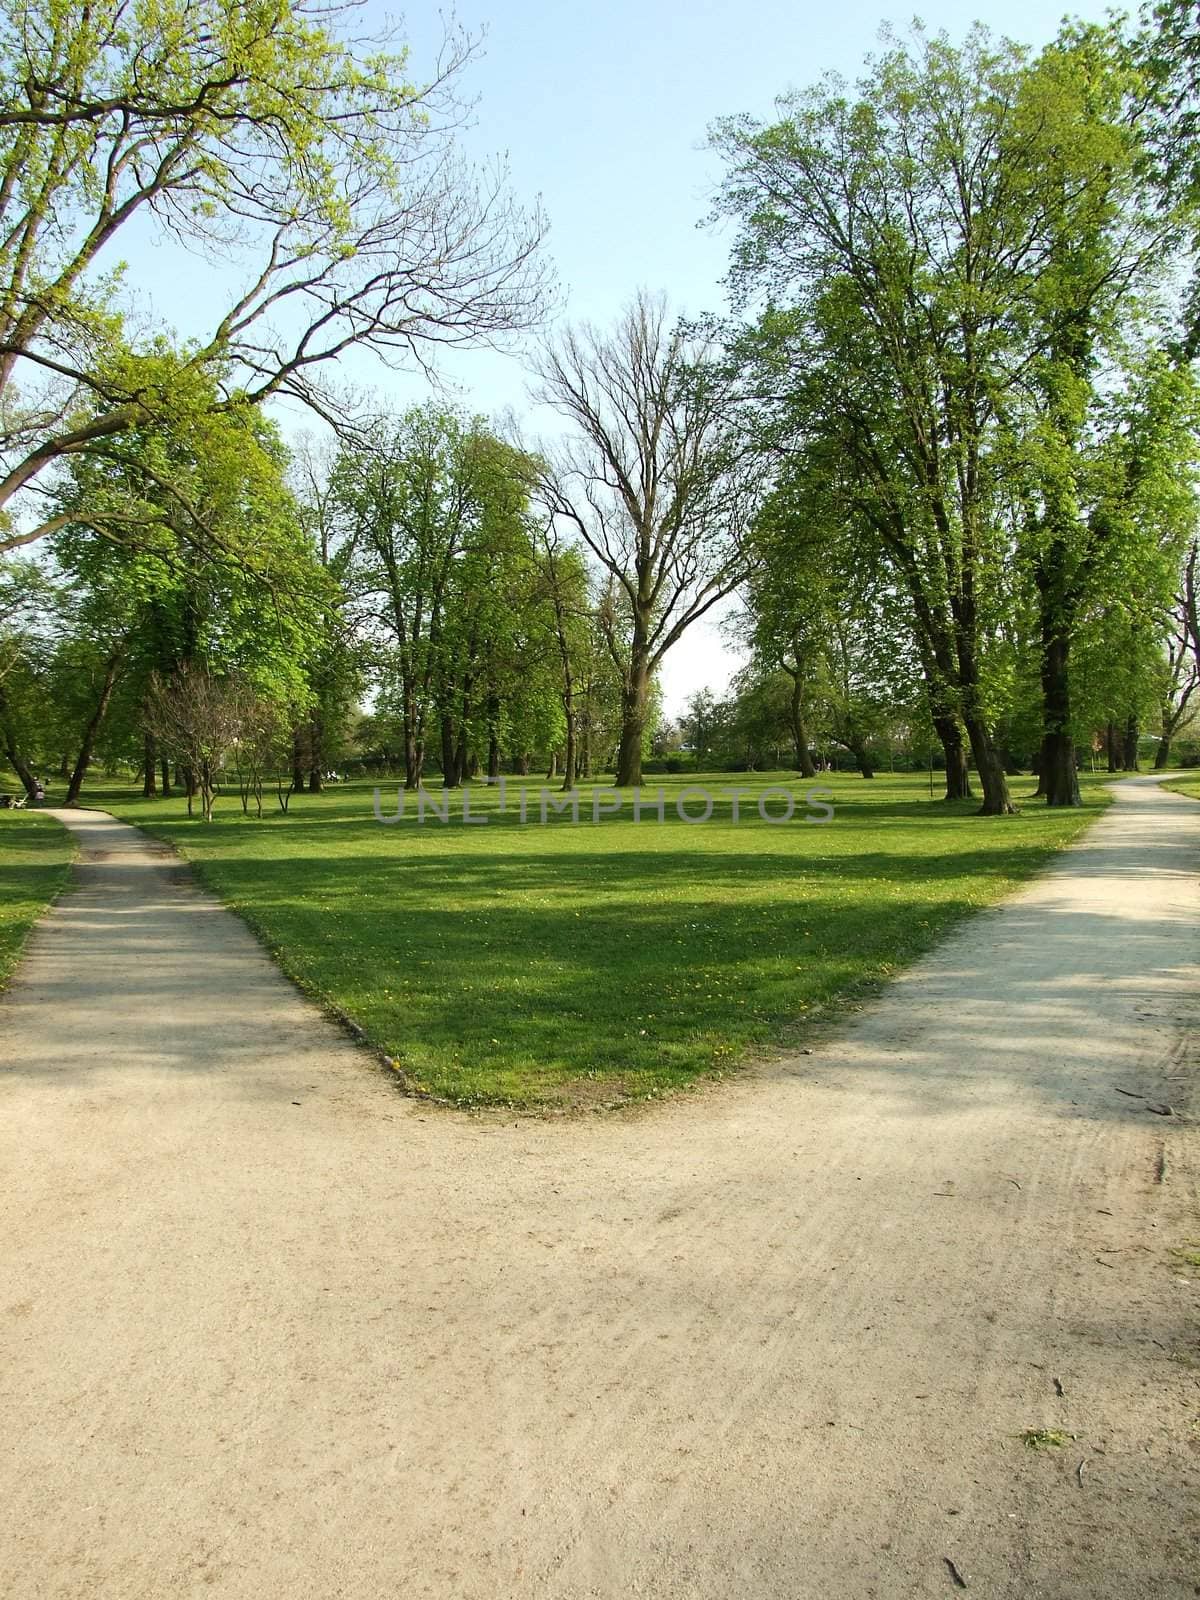 crossroad in the park